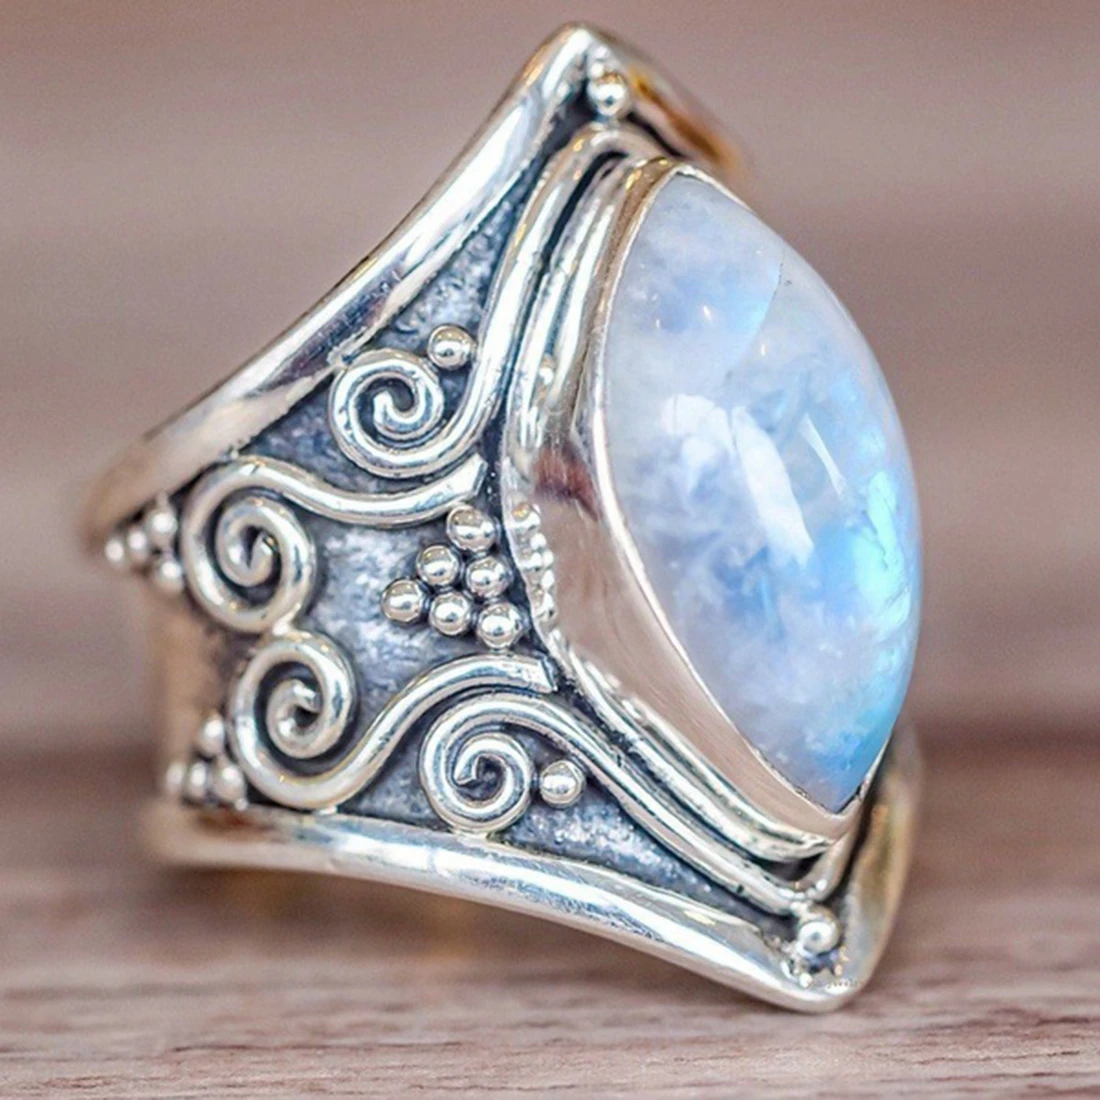 Vintage Silver Color Big Stone Ring for Women Fashion Bohemian Boho Jewelry 2020 New Hot